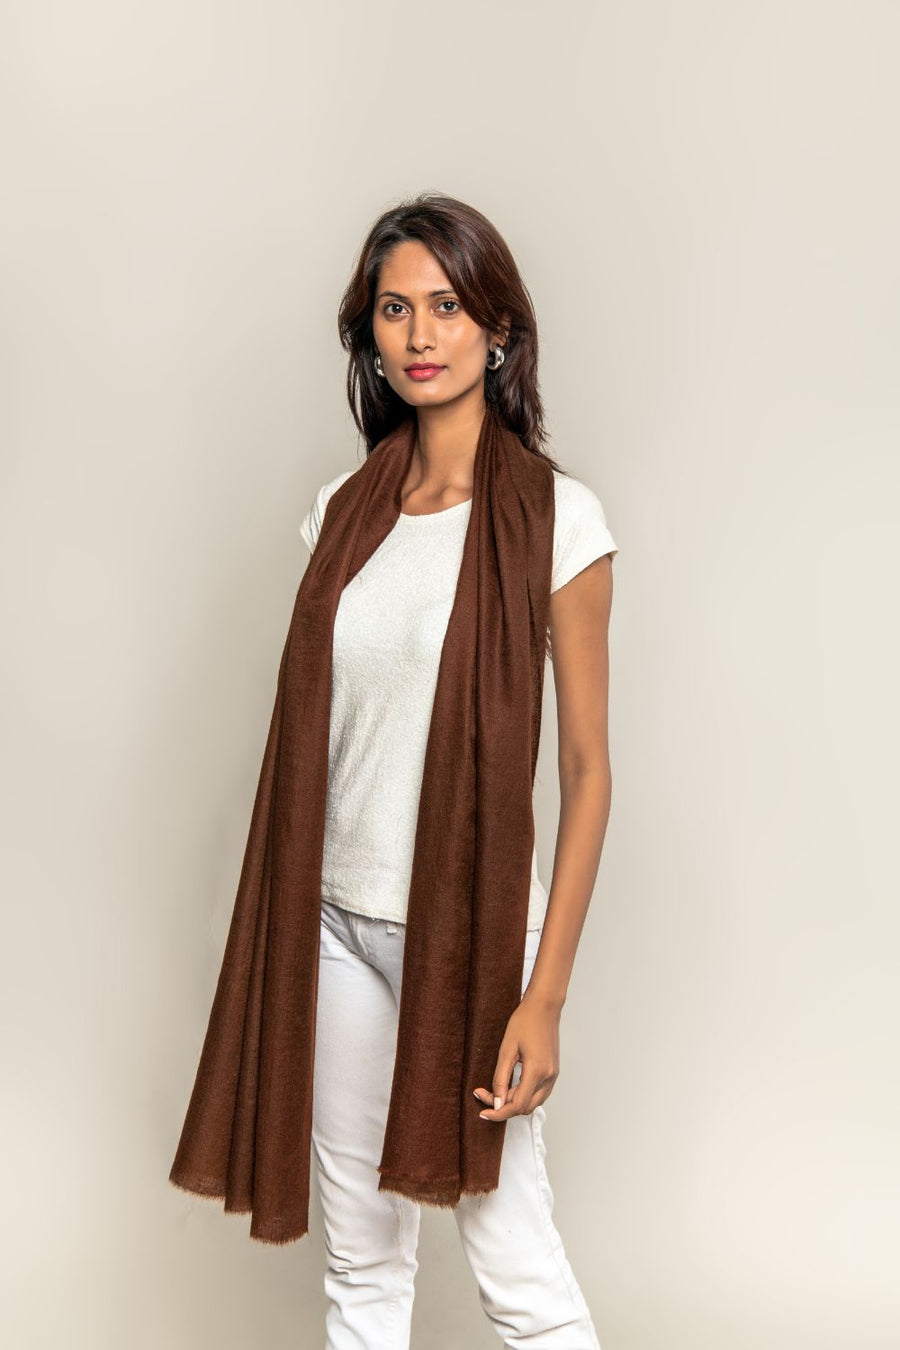 Premium Quality Pashmina Stoles for a Luxurious Look